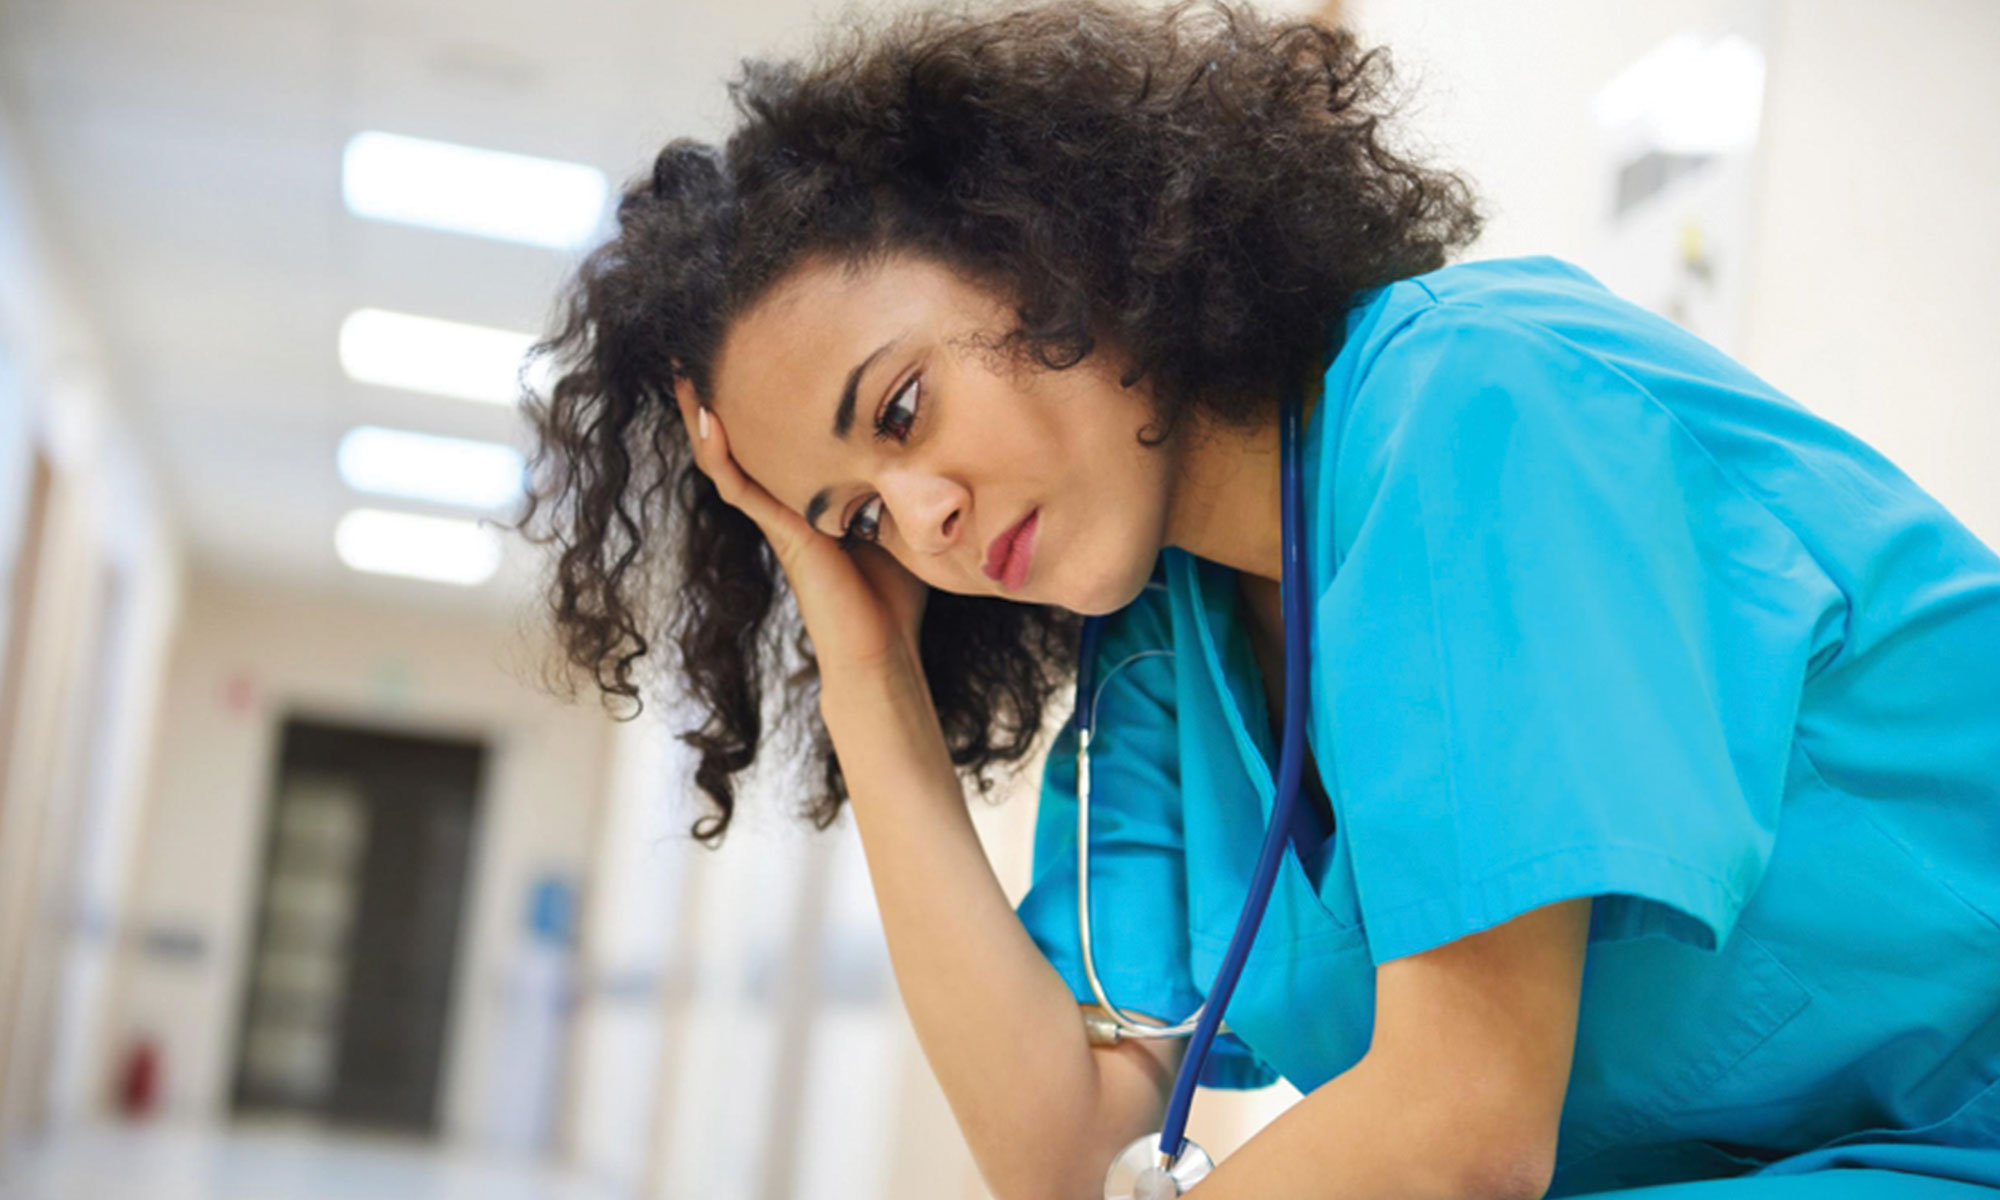 A Rising Epidemic: Violence Against Healthcare Workers